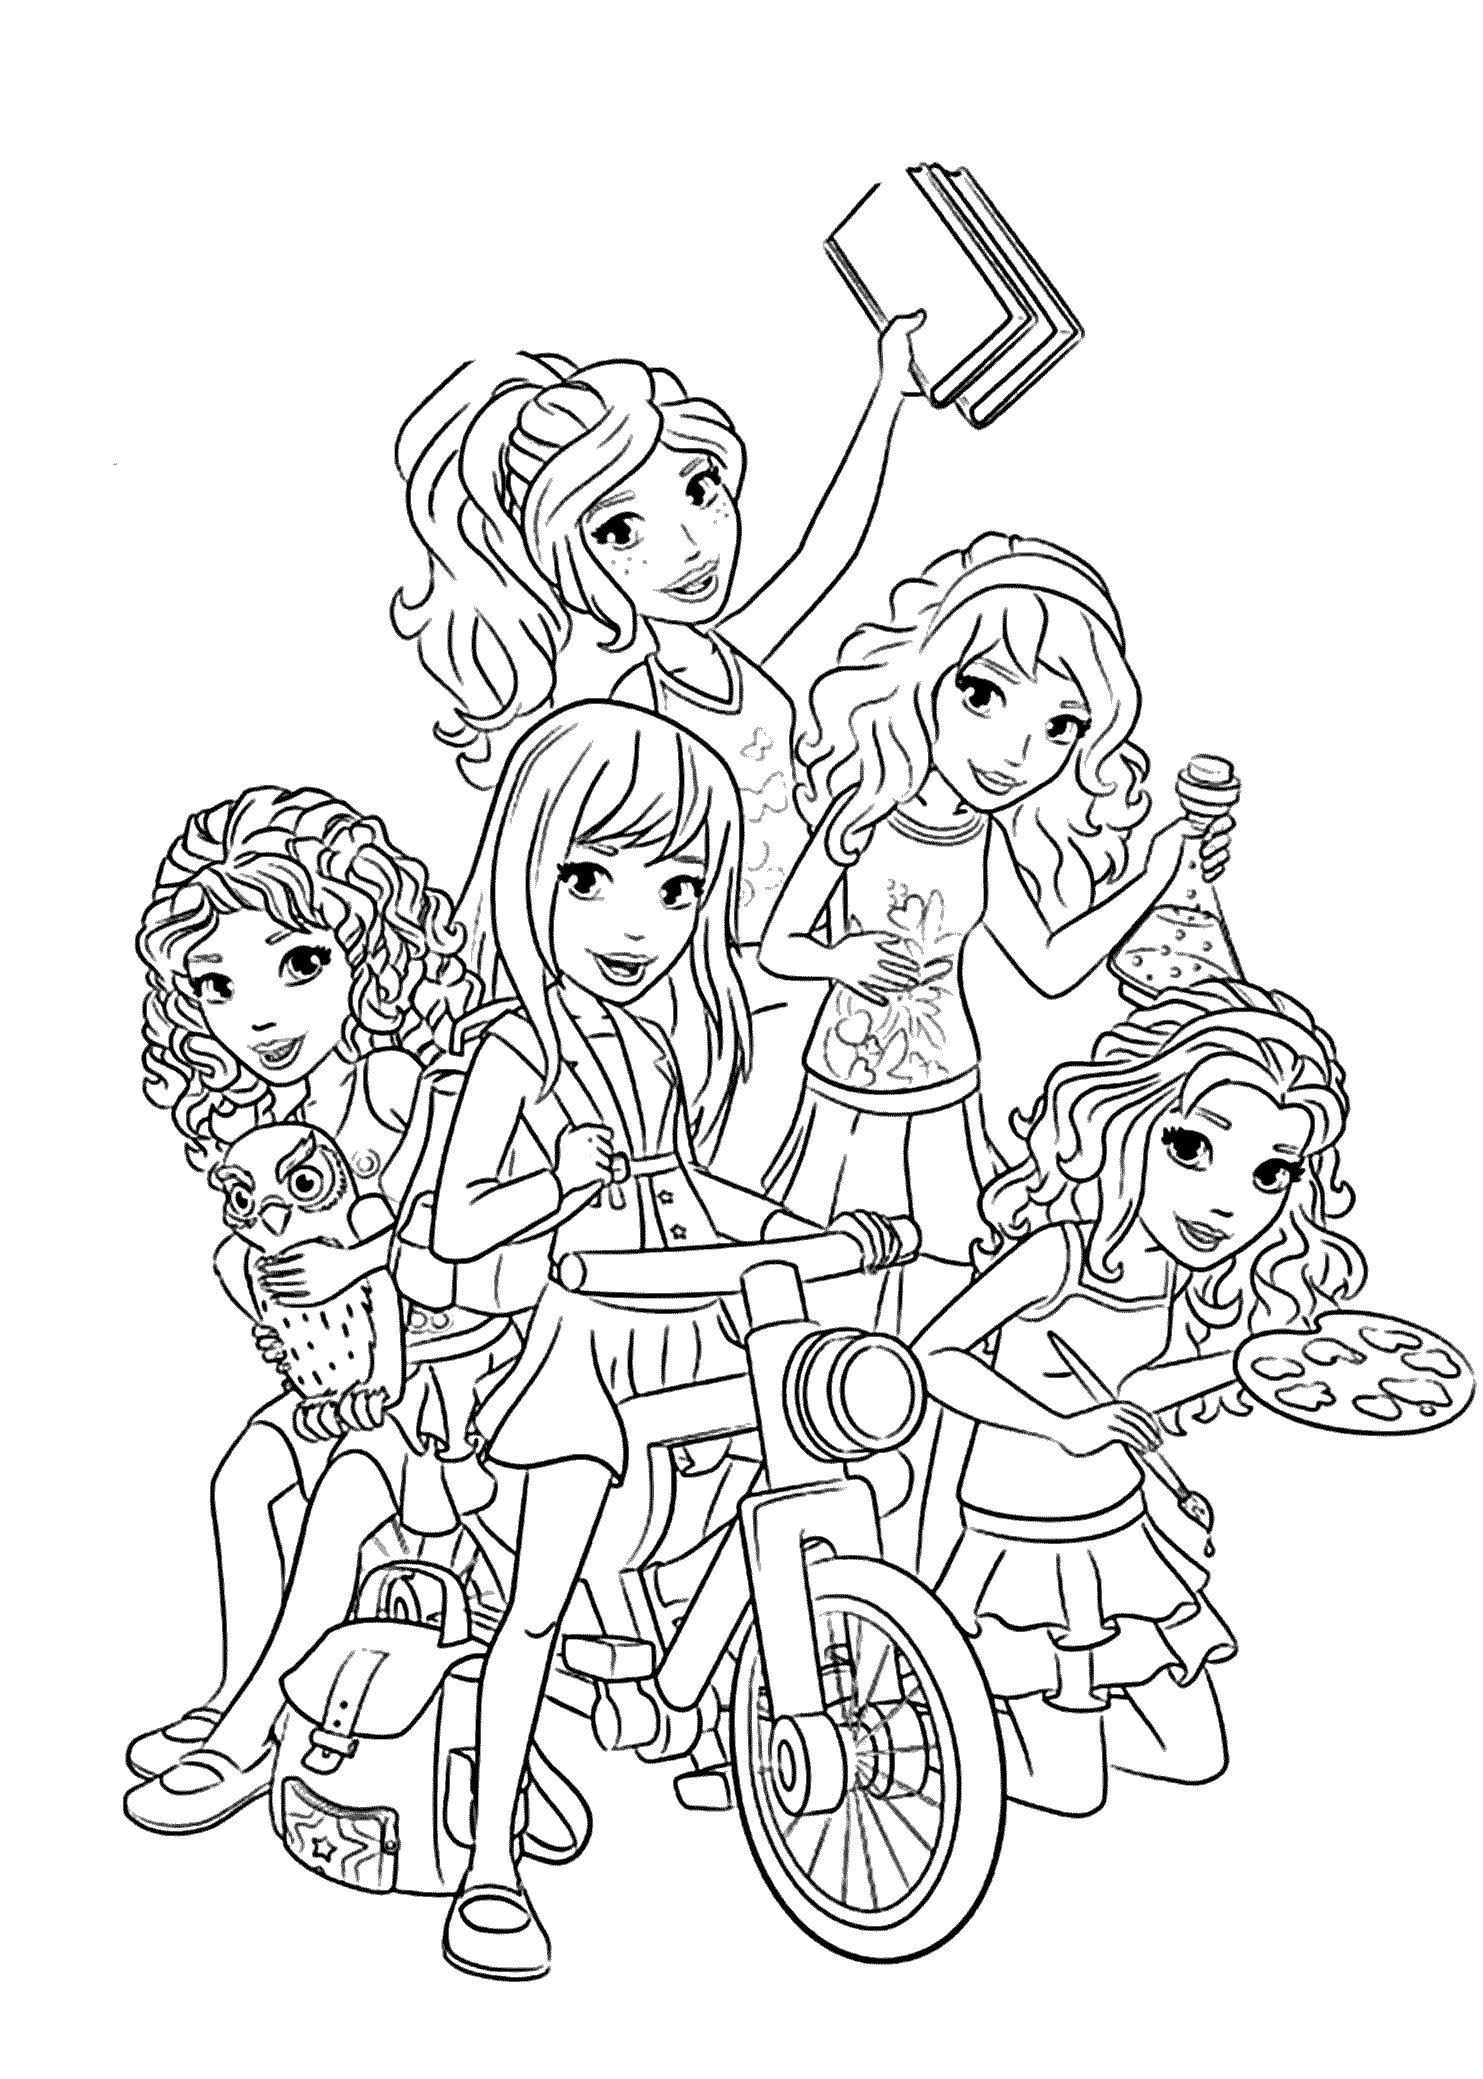 Lego Coloring Pages For Girls